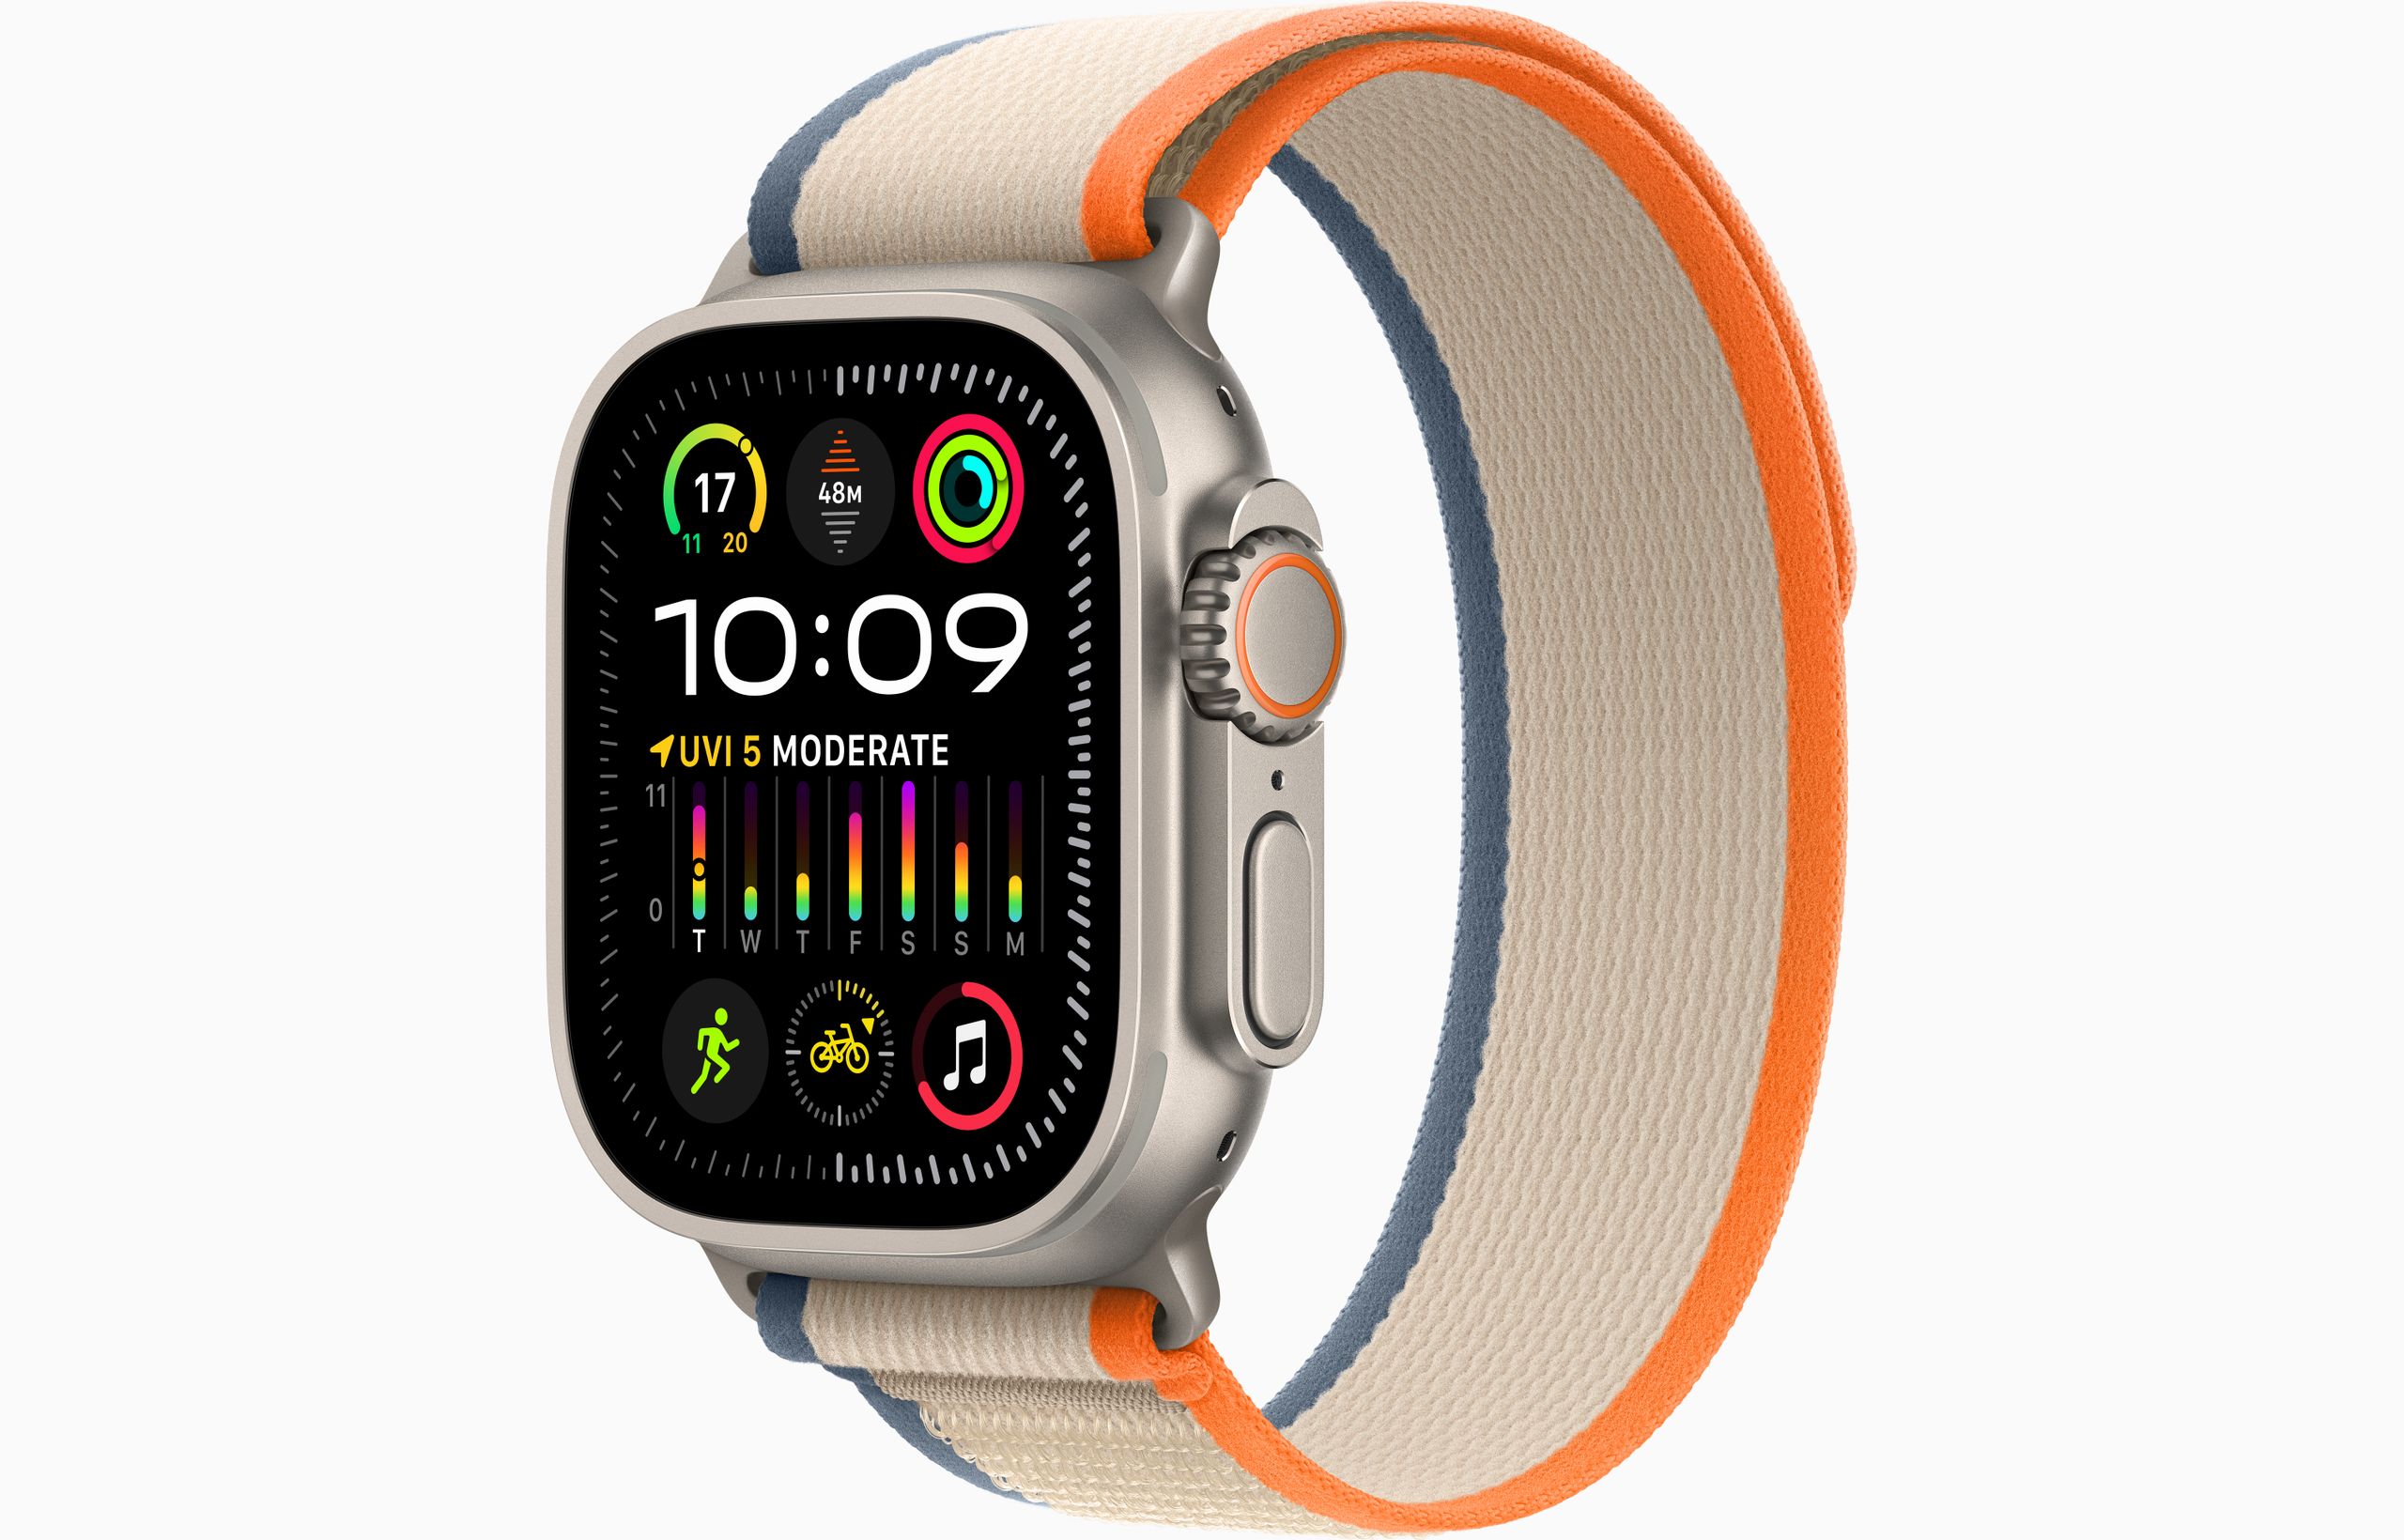 Apple Watch Ultra 2 Titanium Case with Trail Loop